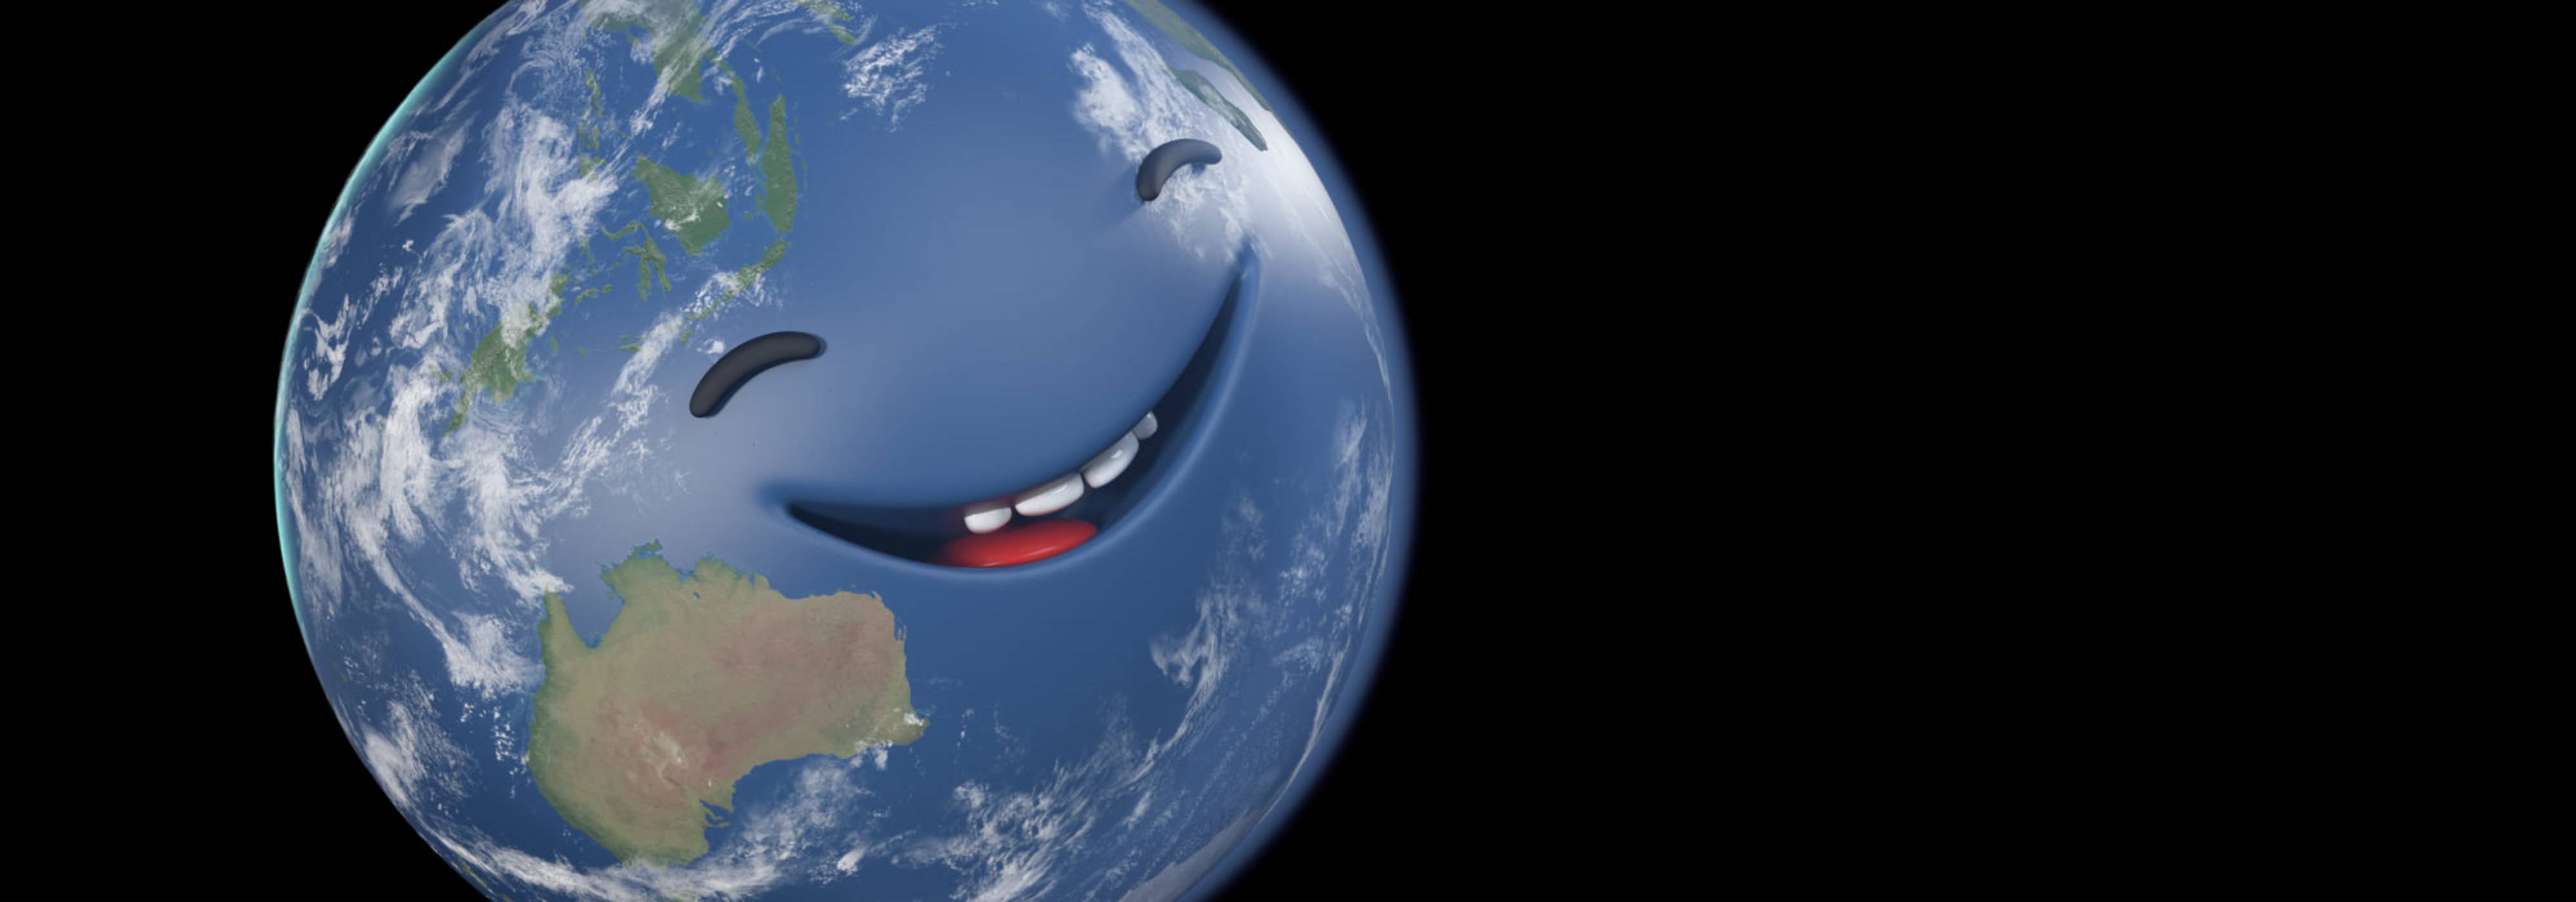 Our very own planet earth smiling with Australia on the side of its face.